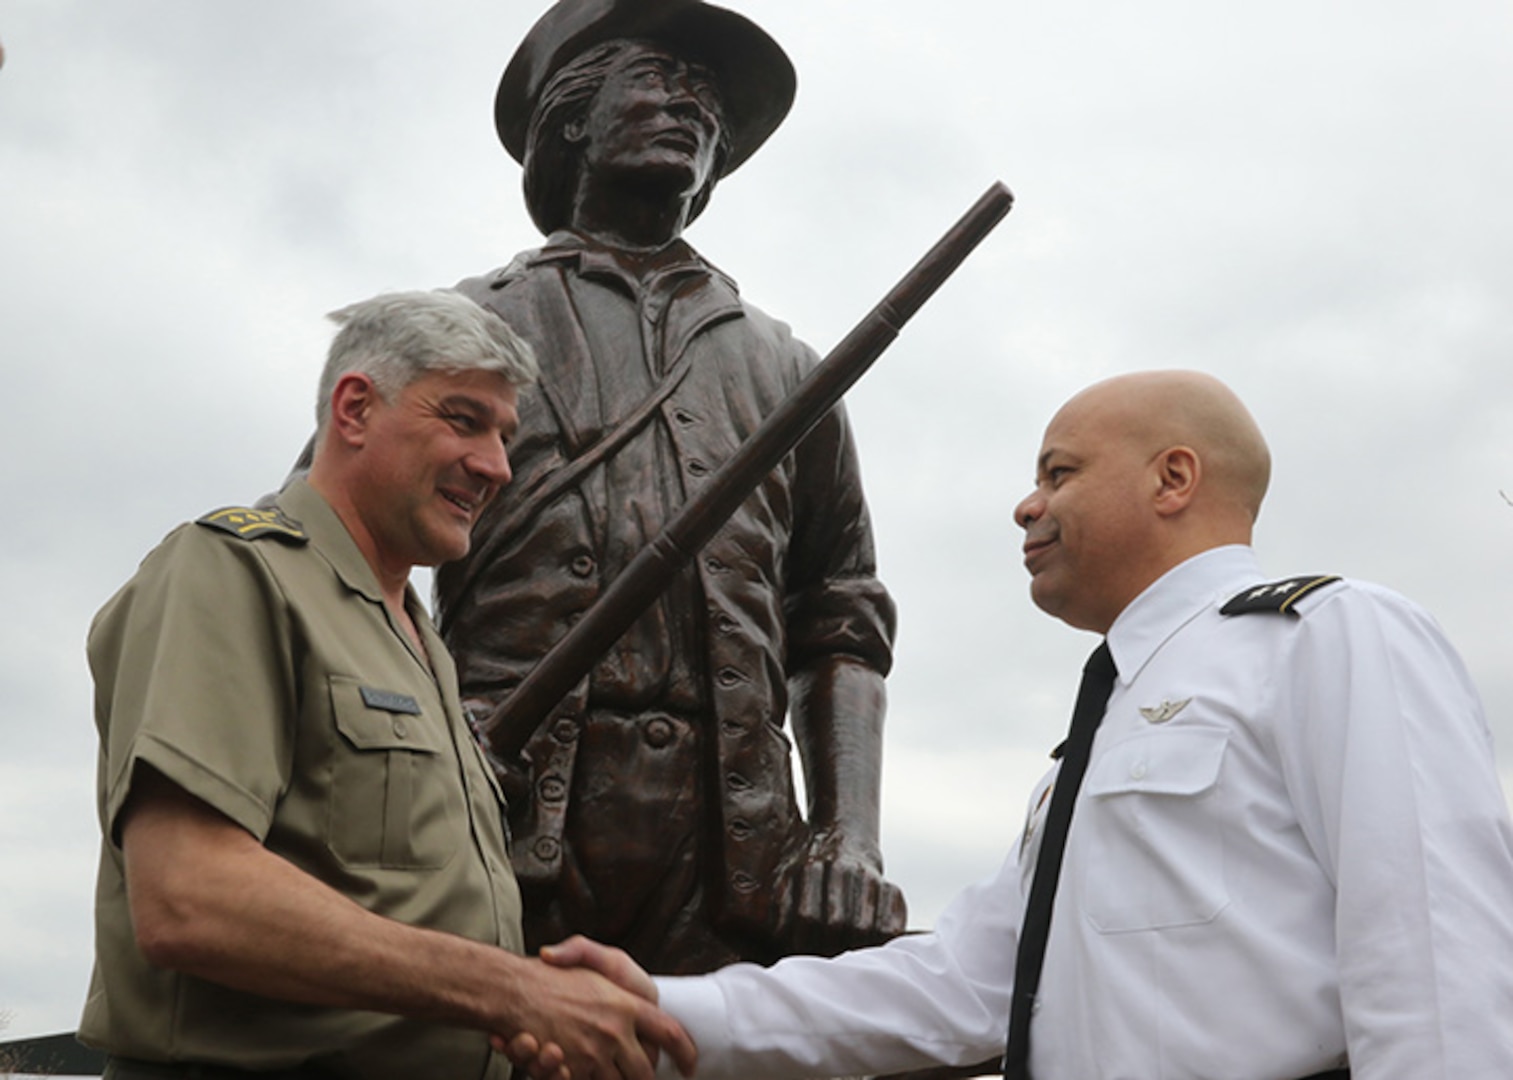 Maj. Gen. John C. Harris Jr., right, Ohio adjutant general, shakes hands with Col. Saša Milutinović, chief of religion section of the Serbian Armed Forces, April 5, 2019, at the Maj. Gen. Robert S. Beightler Armory in Columbus, Ohio. This was Milutinović’s first visit to Ohio, as part of the Ohio-Serbia pairing through the State Partnership Program.